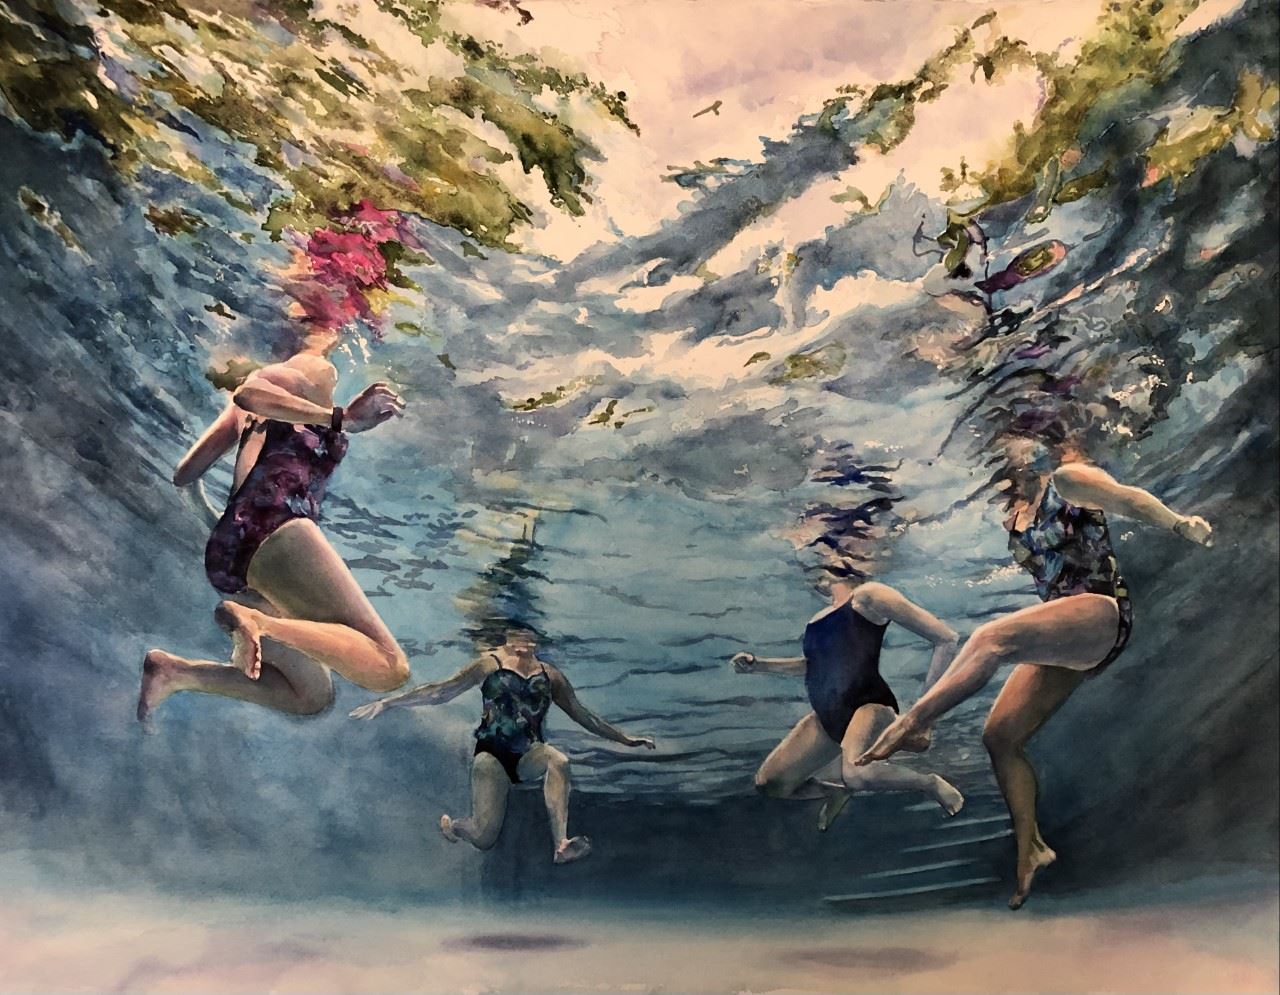 Watermedia painting by S. Levy, view from below the surface of a pool of women's legs treading water